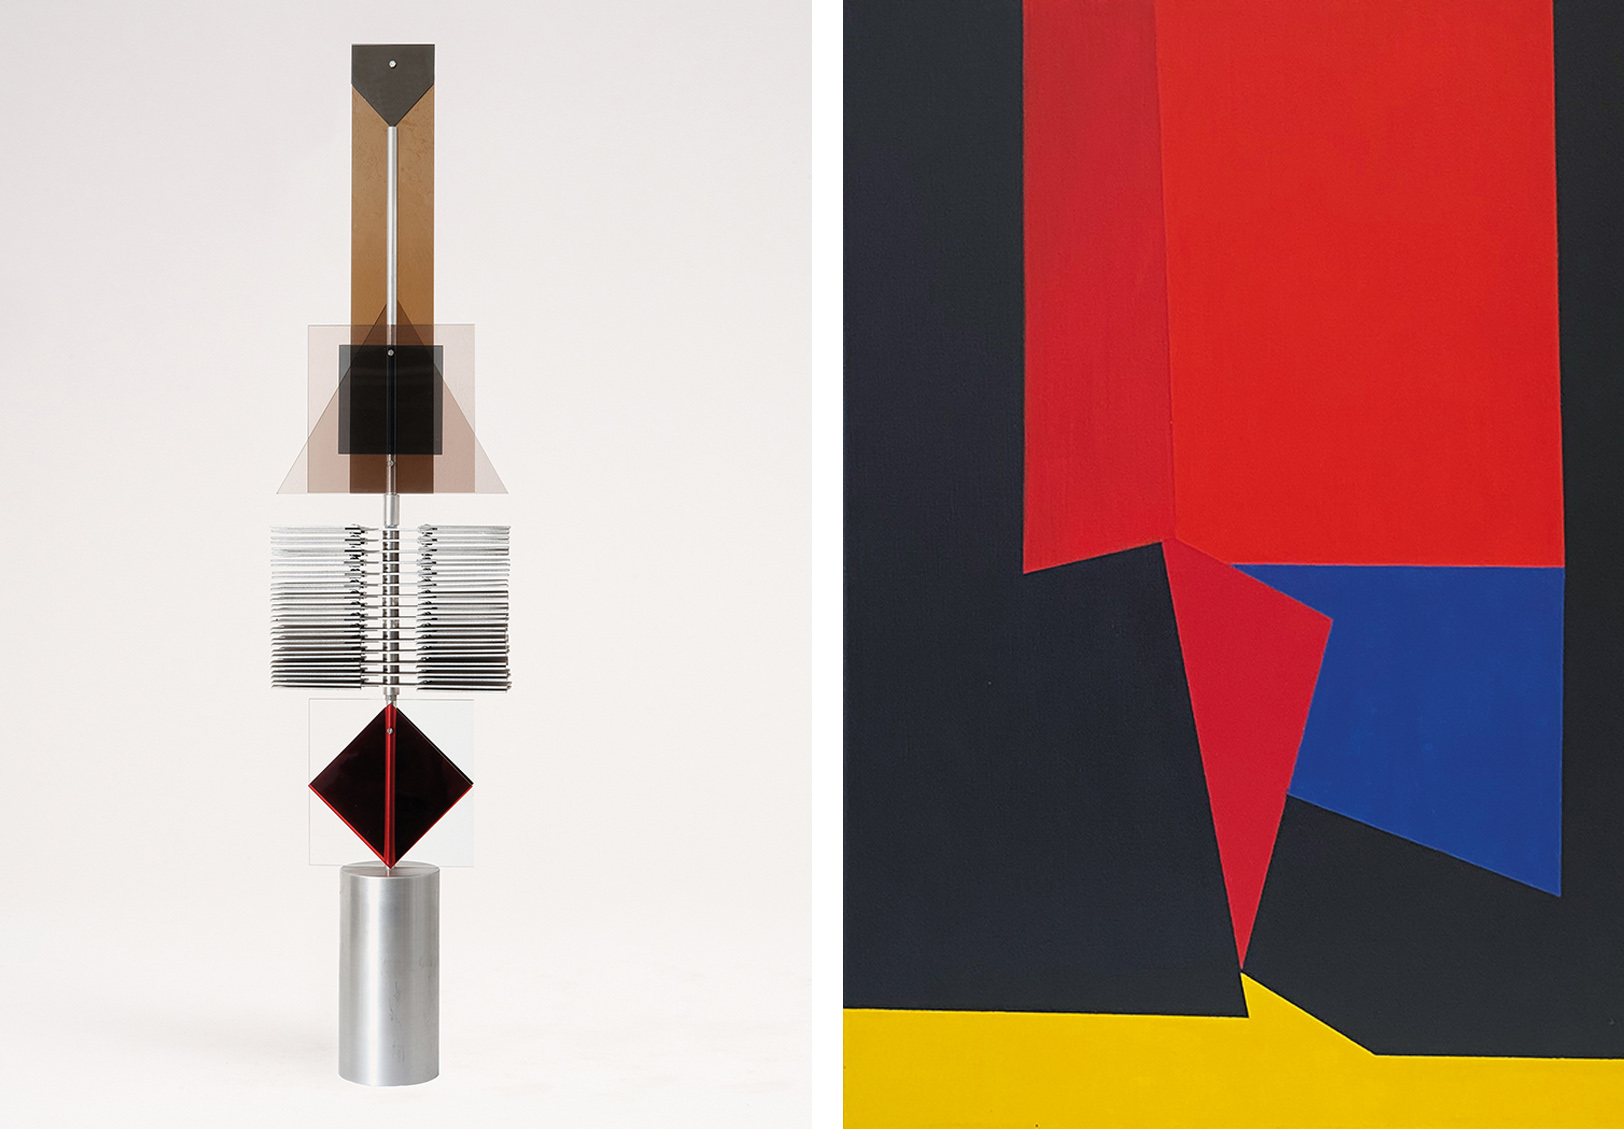 Wolfram Beck | Assemblage | 1971 | stainless steel and acrylic | h 93 cm and acrylic on canvas | 1990 | 61 x 51 cm